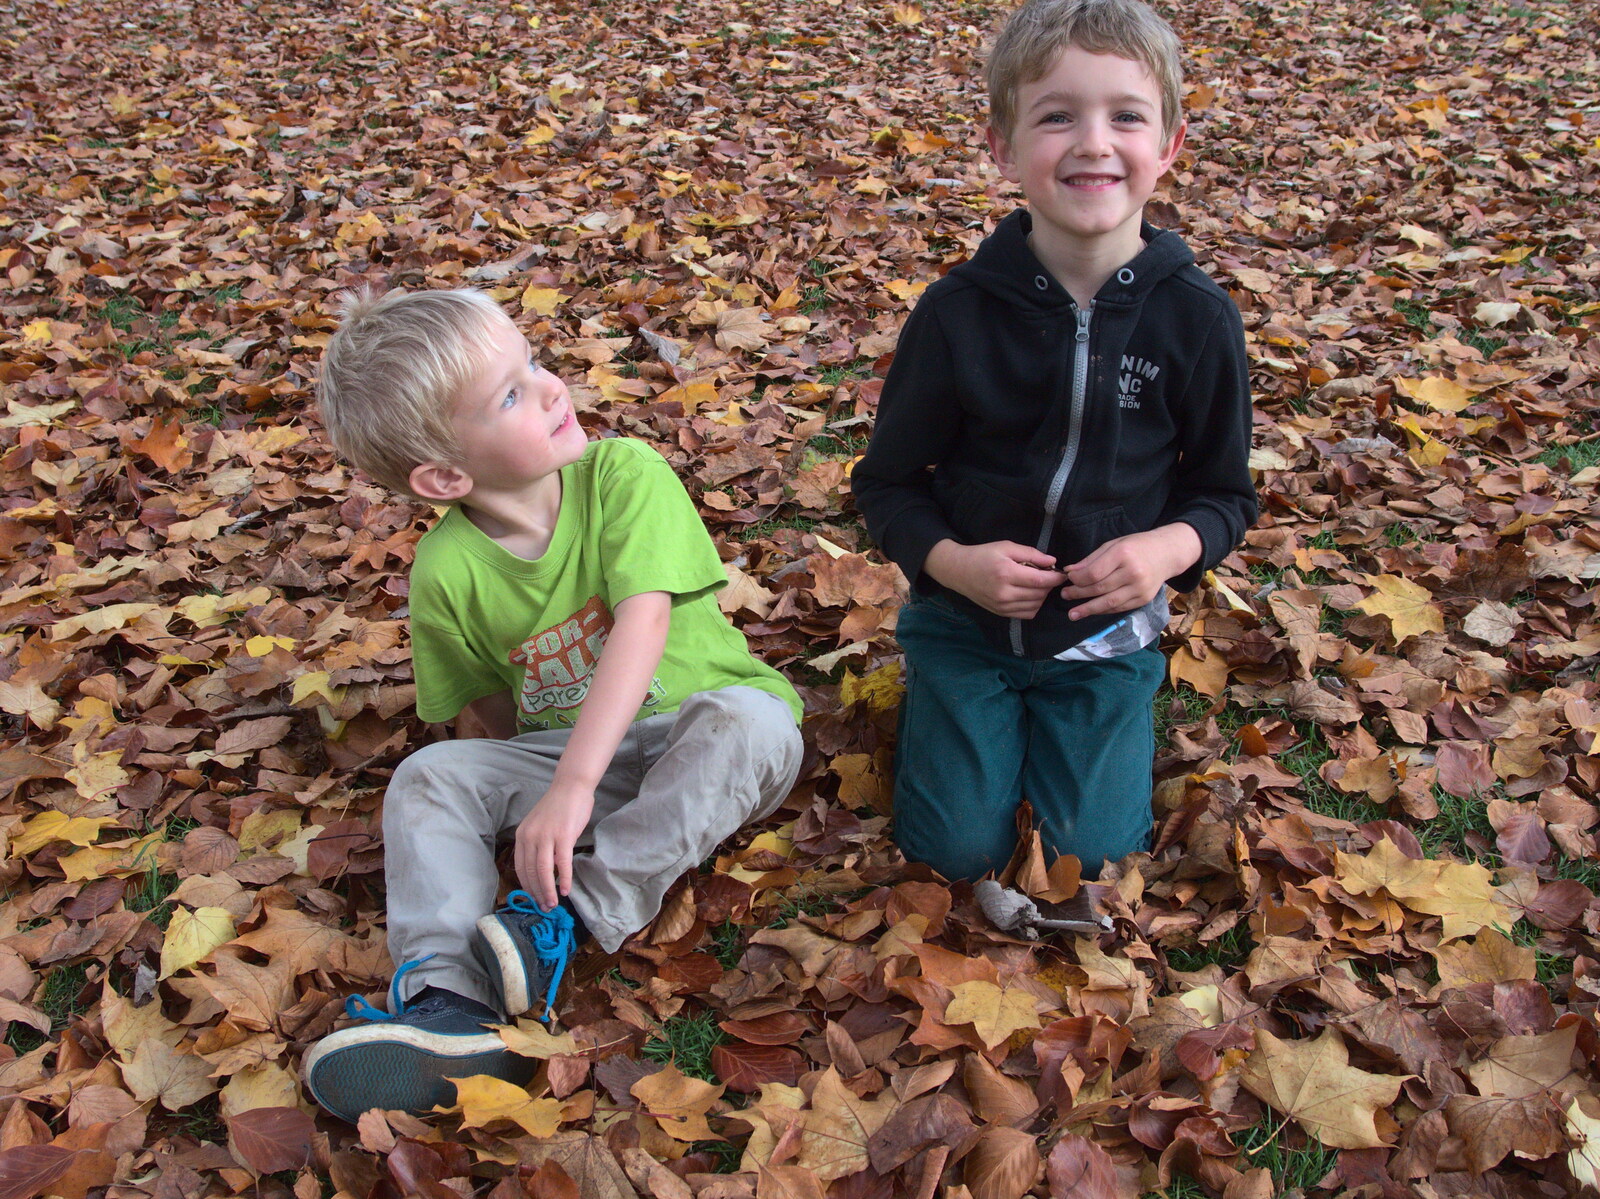 Harry and Fred in the leaves from Abbey Gardens in Autumn, Bury St. Edmunds, Suffolk - 27th October 2015